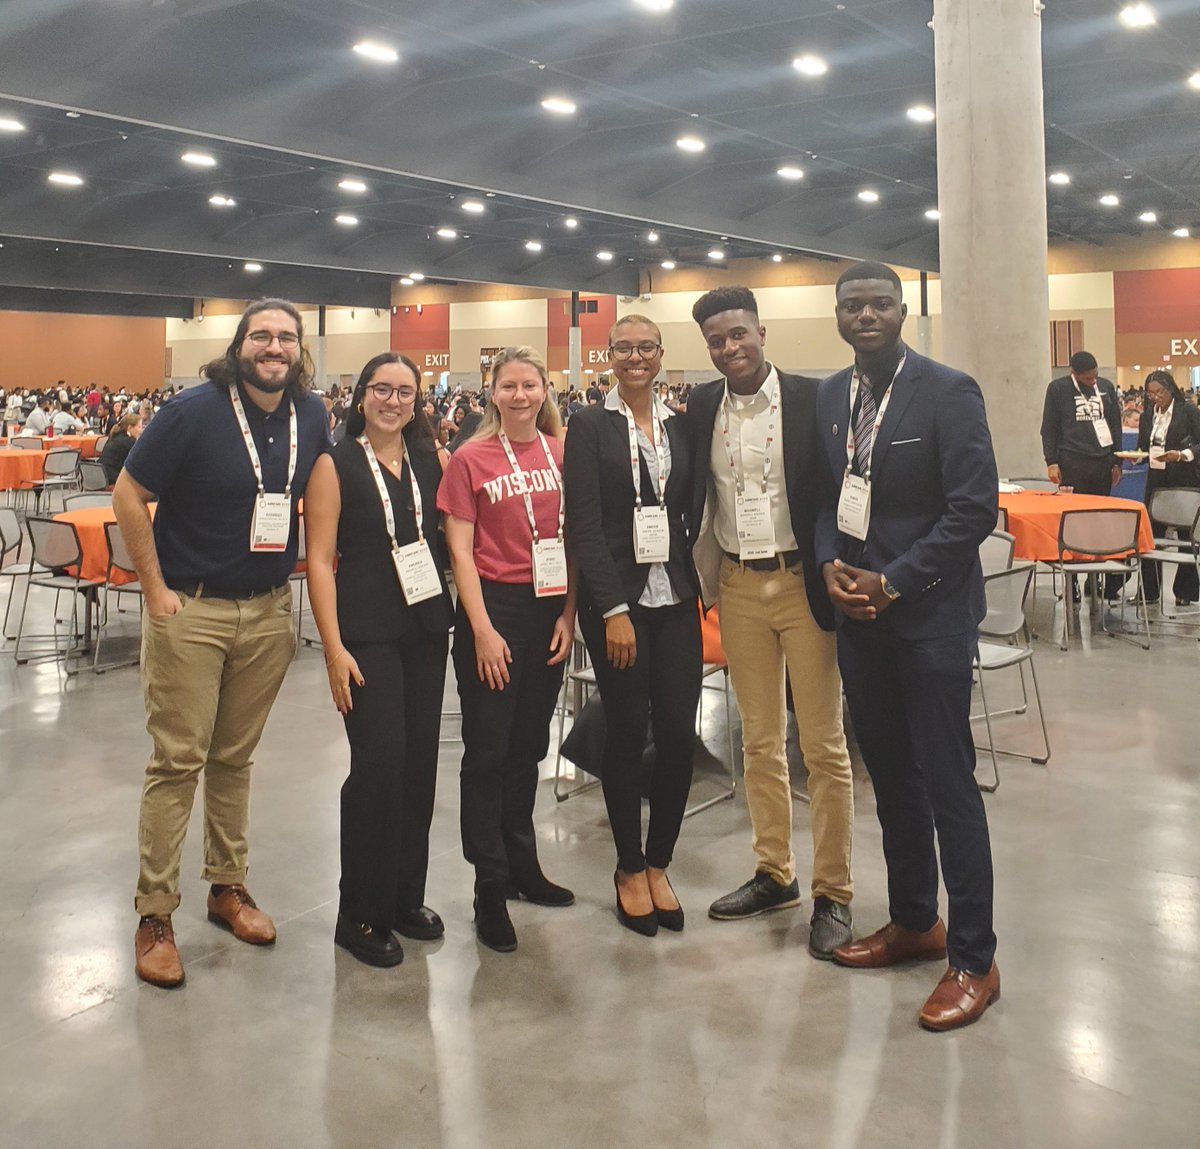 UW MSTP @ABRCMS! So wonderful to see some of our summer scholars. #SummerResearch #2023ABRCMS #MSTP